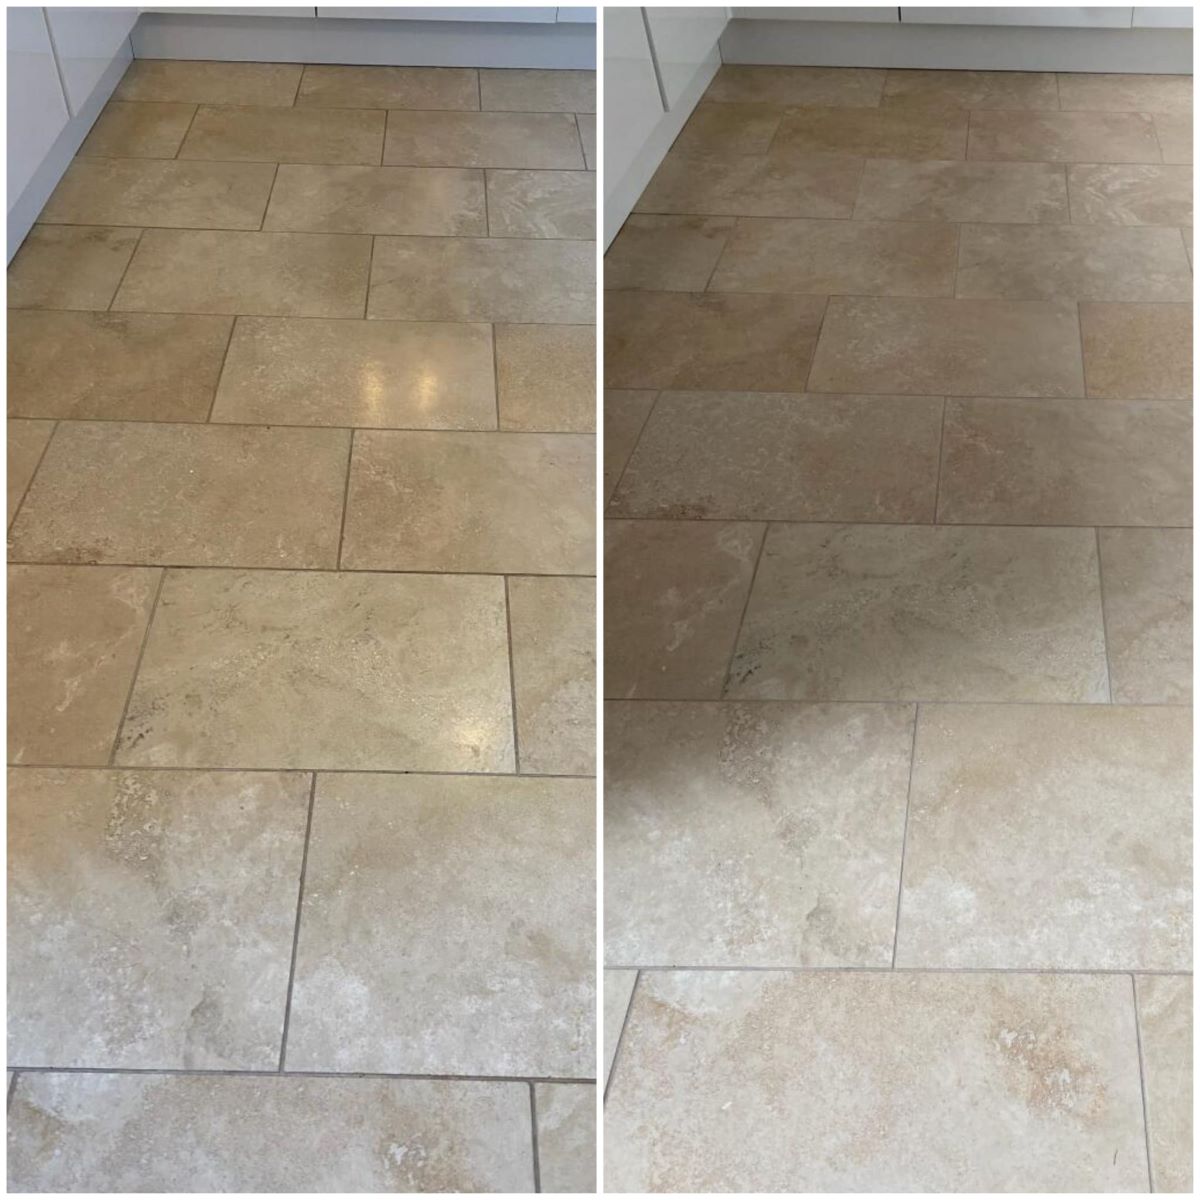 Hard floor cleaning before and after image